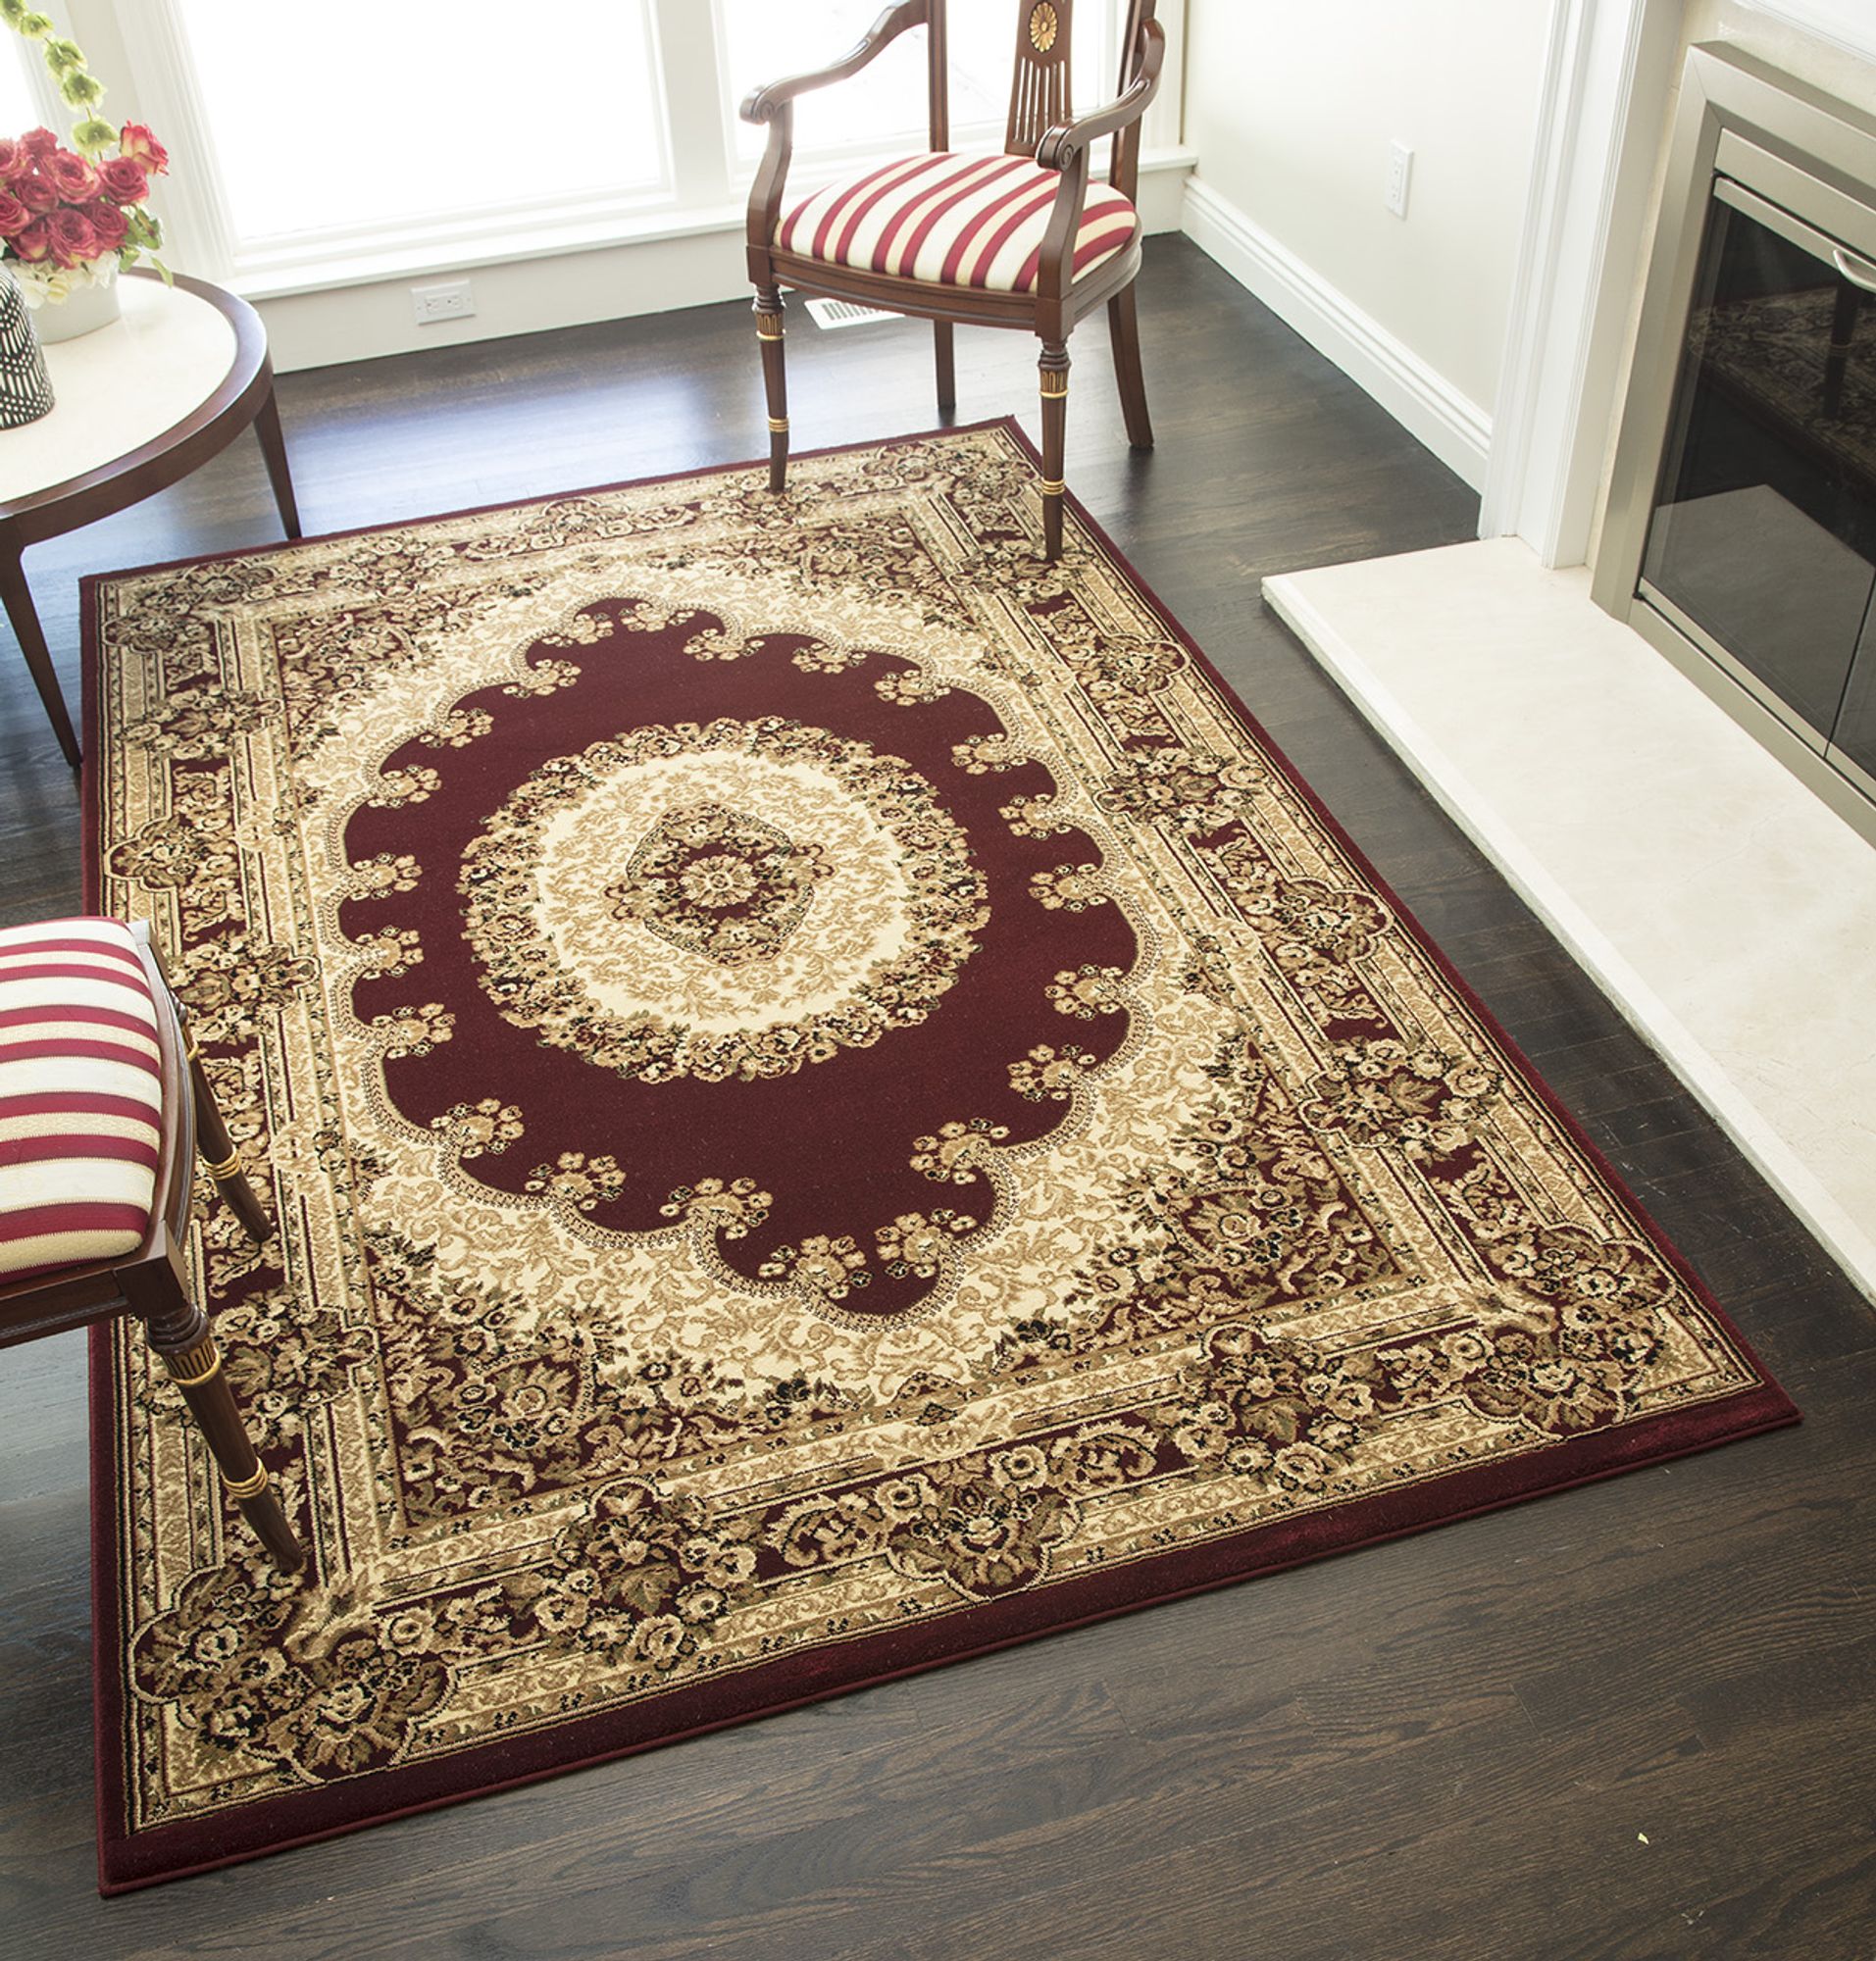 Rugs America Vista 807-RED Kerman Red Oriental Traditional Red Area Rug, 5'3"Round - image 1 of 3